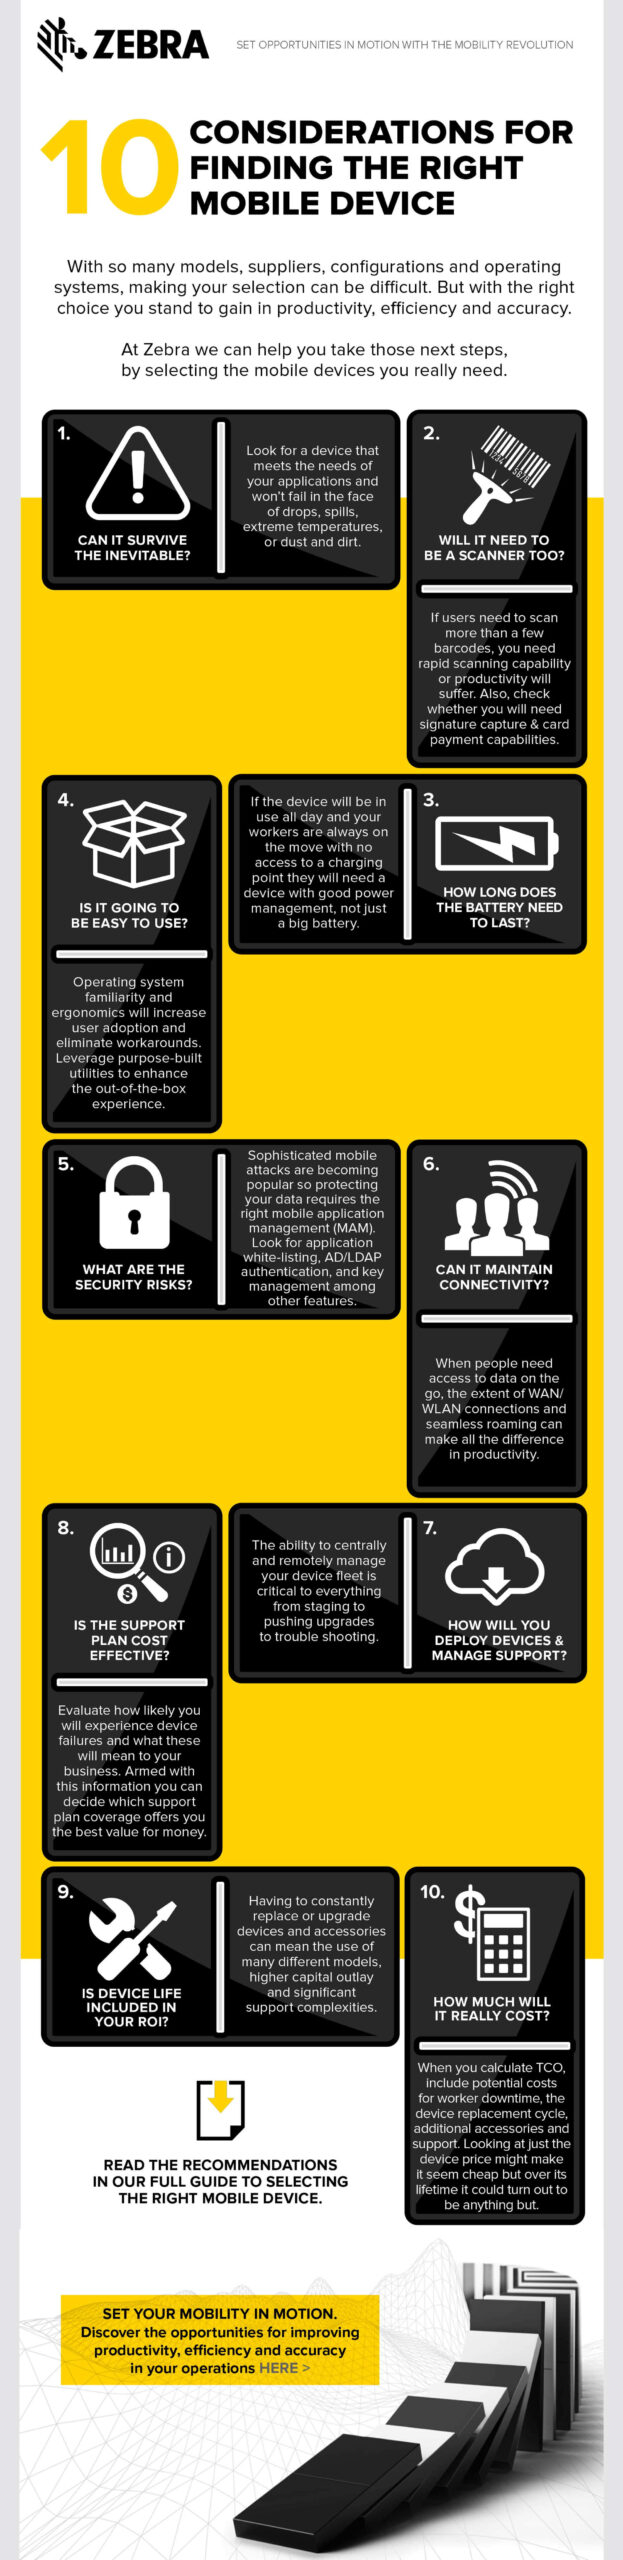 workforce-mobility-find-the-right-device-top-10-tips-infographic-en-gb